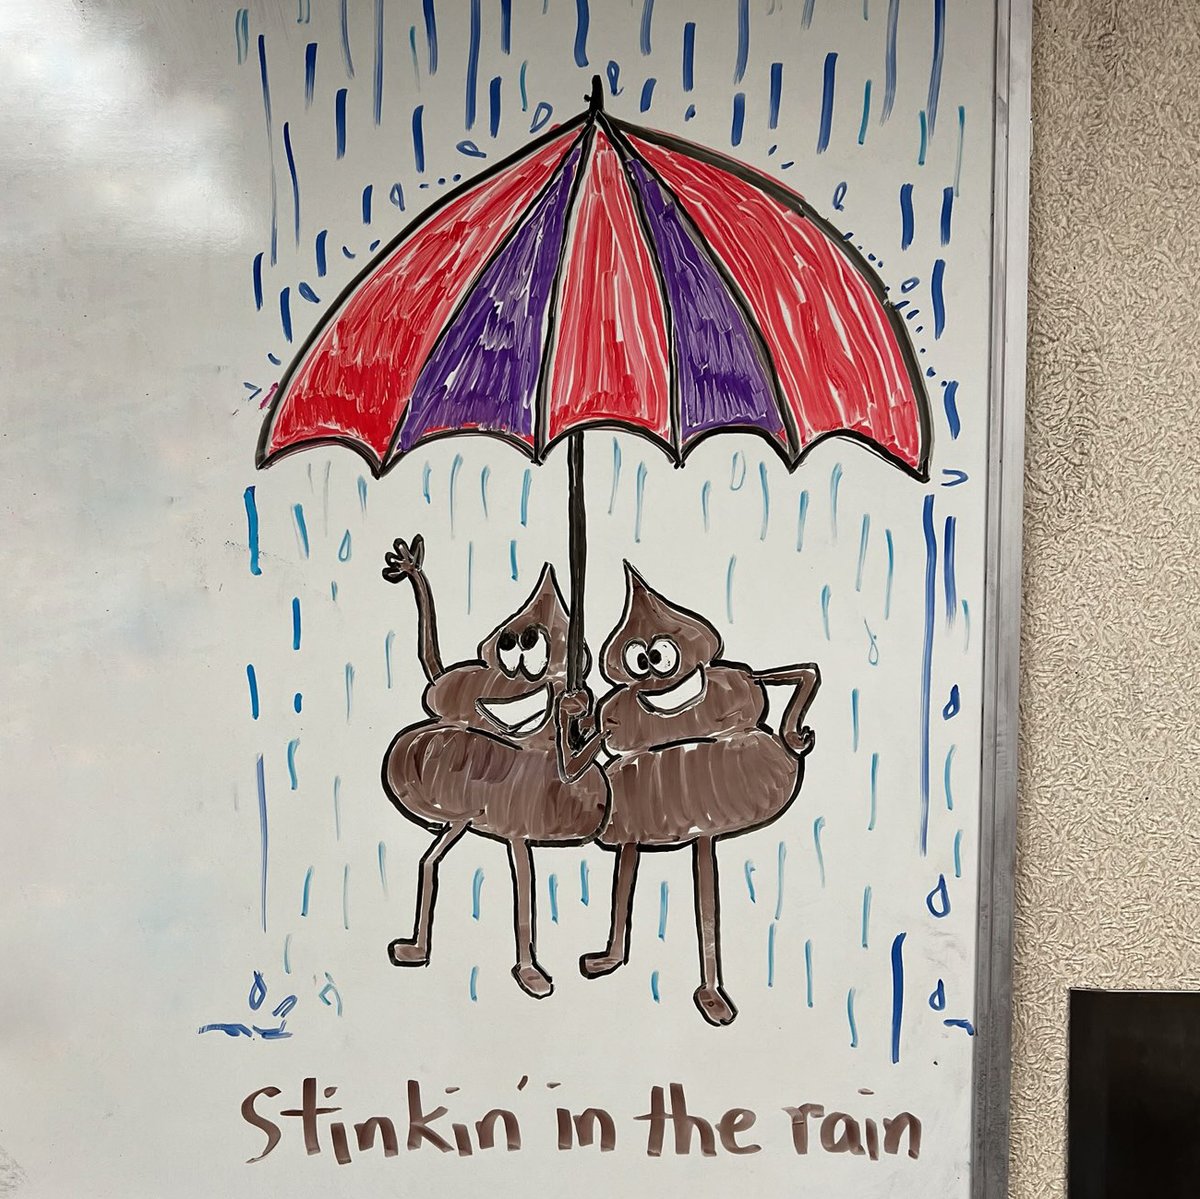 Caught in April's downpour? No worries! 💩 is singin' in the rain and blooming joy! Embrace the splashy serenades, 'cause May flowers await! 🌷 #GITwitter